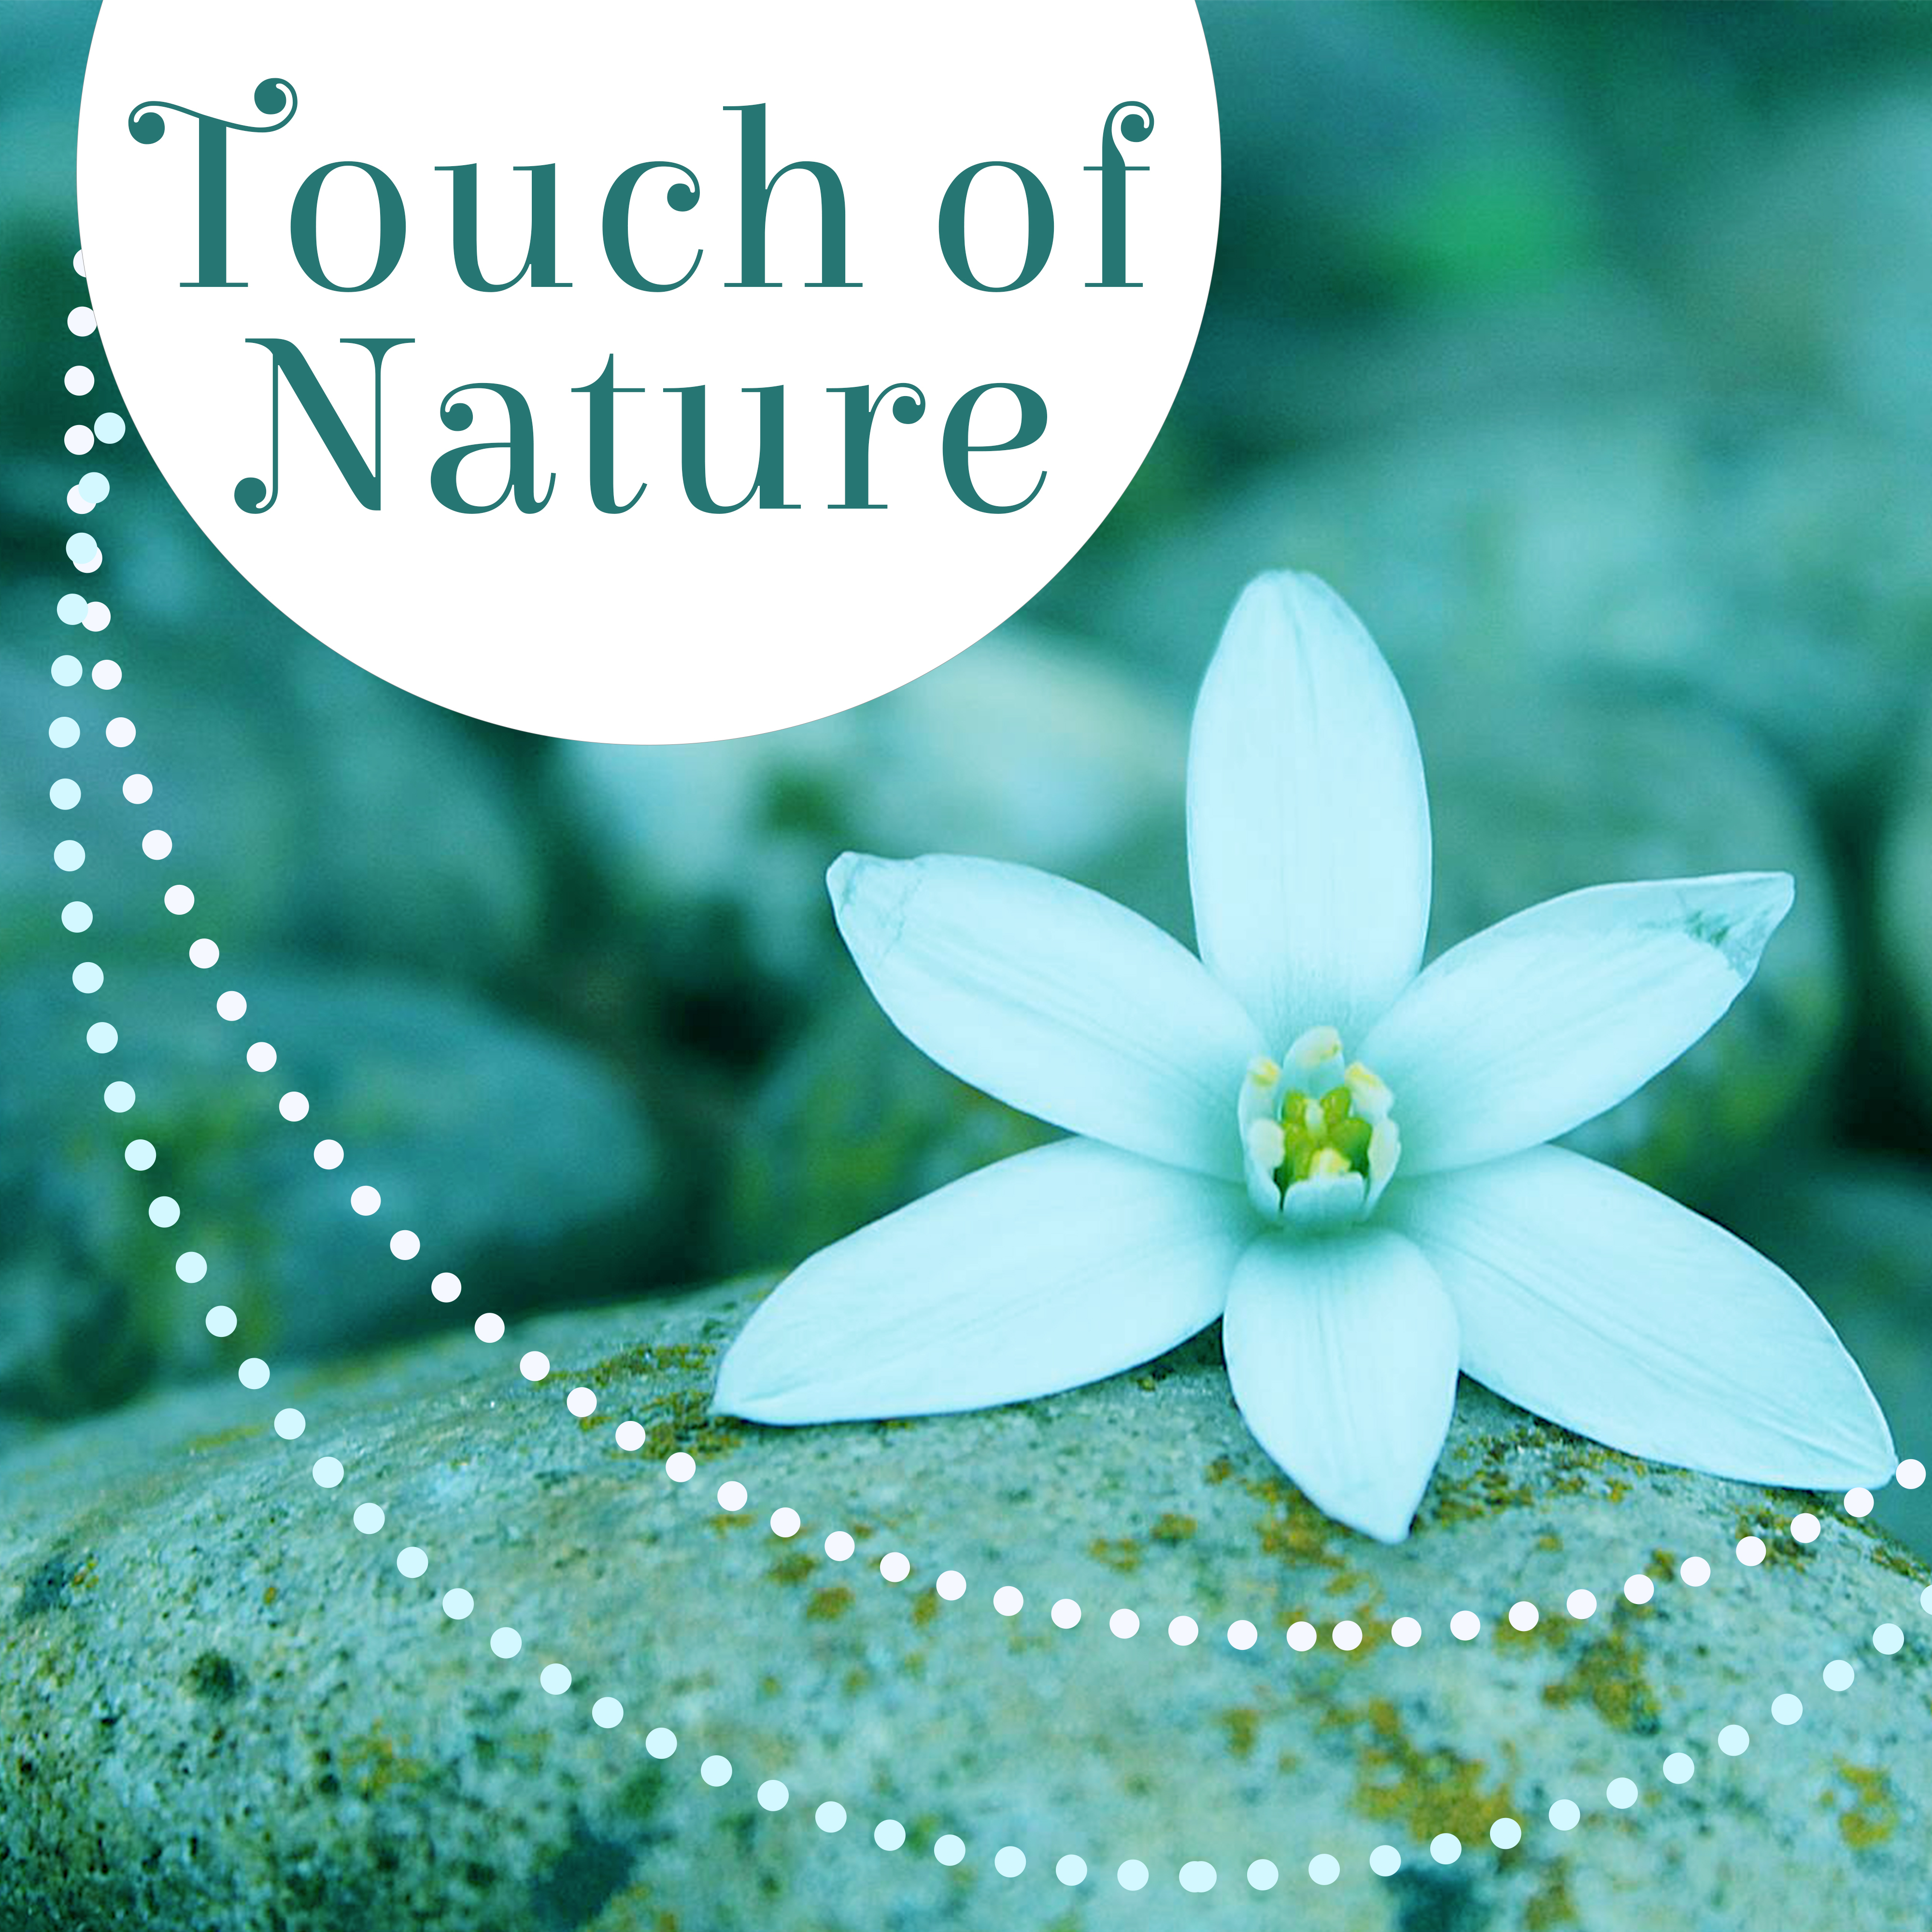 Touch of Nature  Spa Music, Peaceful Music, Nature Sounds for Relaxation, Ocean Waves, Singing Birds, Relax, Wellness, Pure Massage